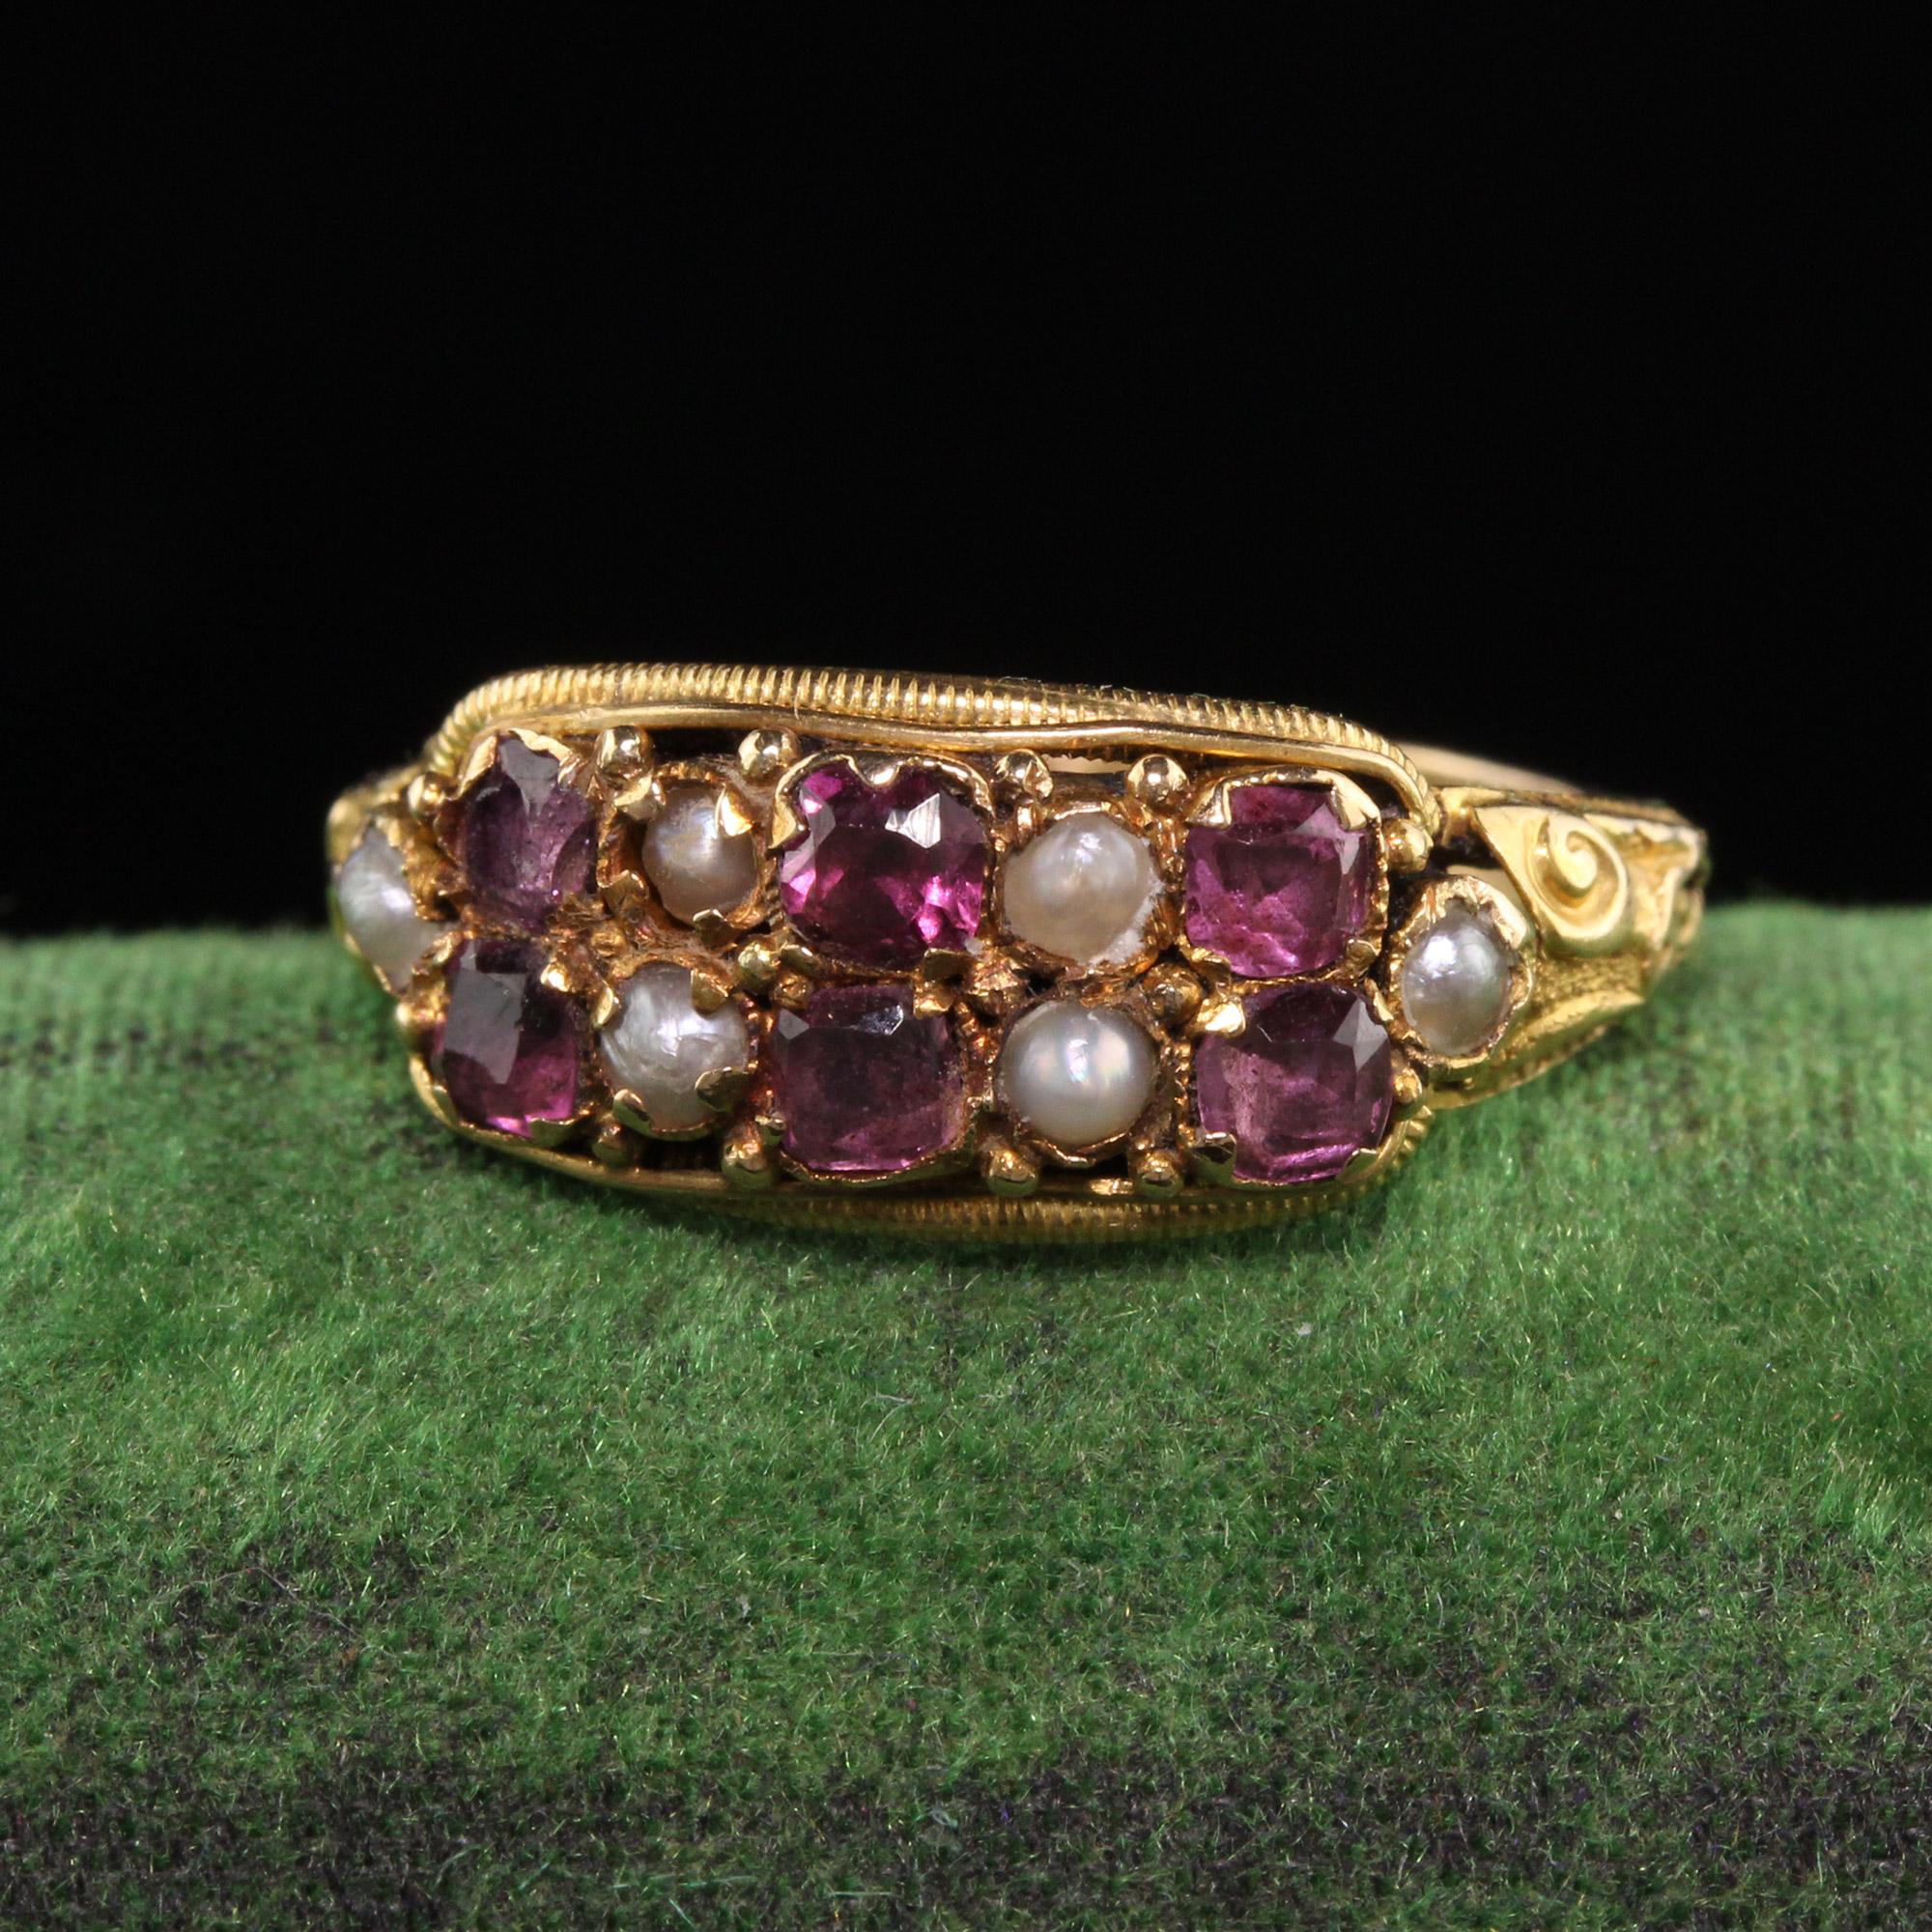 Beautiful Antique Victorian 14K Yellow Gold English Garnet and Pearl Ring. This beautiful ring is fully hallmarked inside the band and is in great condition.

Item #R1037

Metal: 15K Yellow Gold

Weight: 2.1 Grams

Garnet: Approximately .50